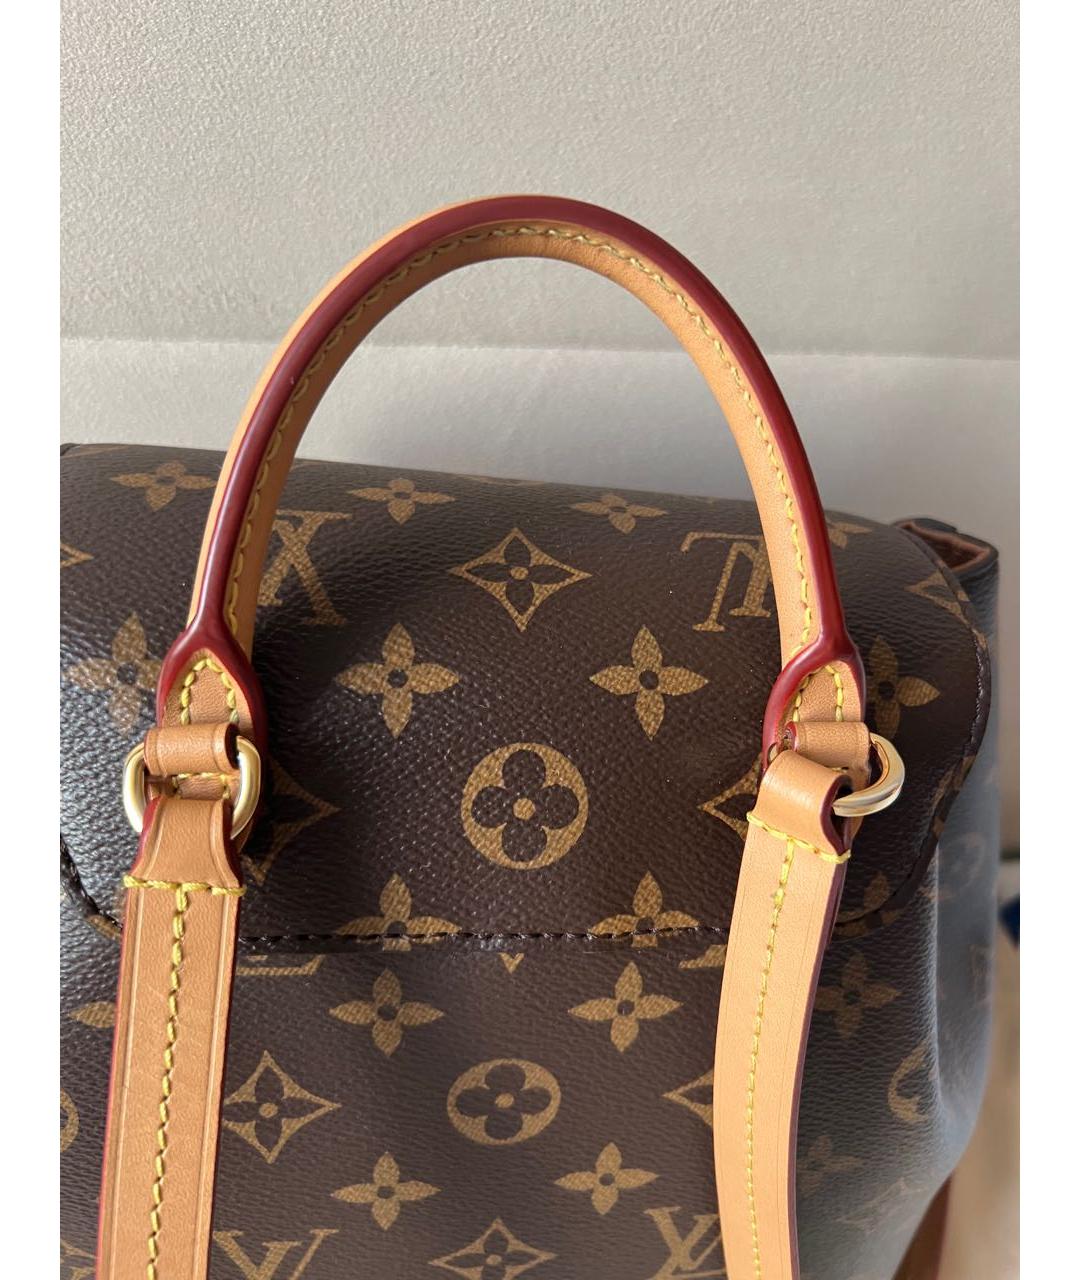 LOUIS VUITTON PRE-OWNED Мульти рюкзак, фото 5